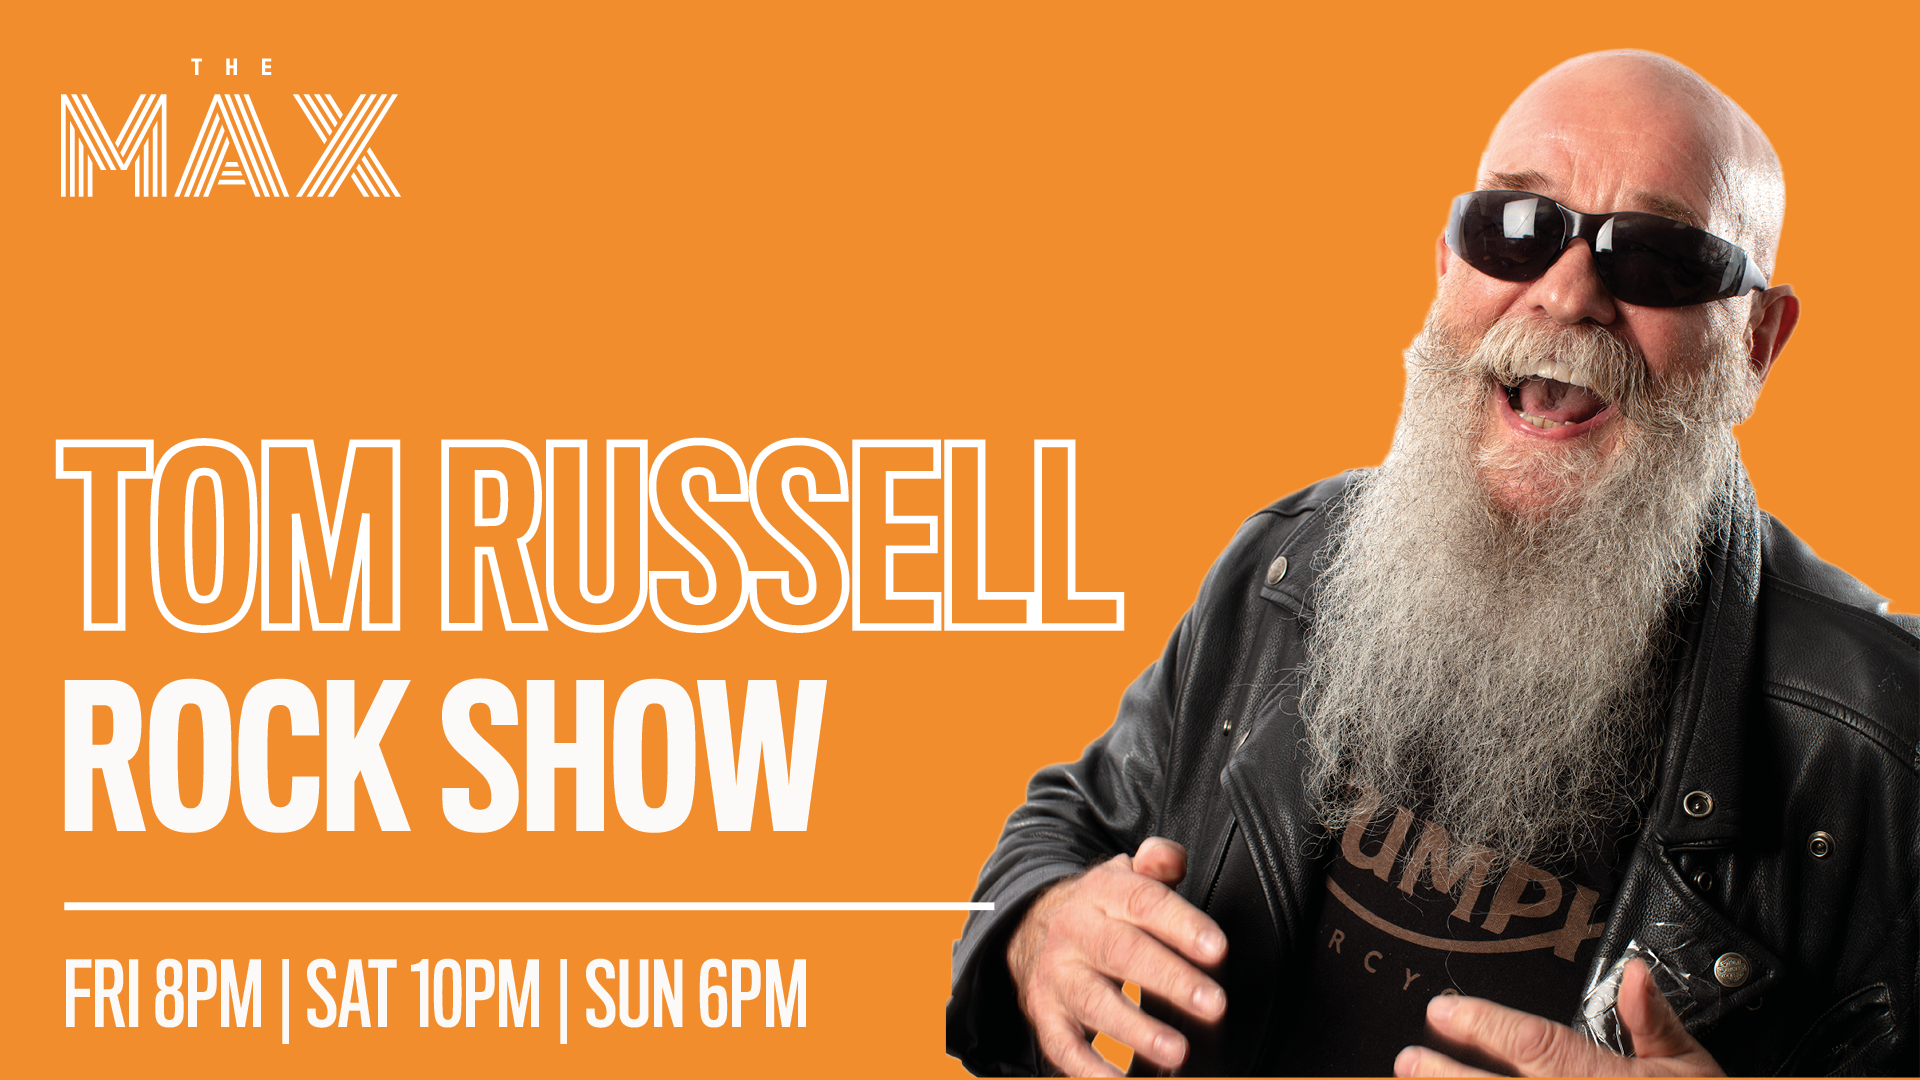 Foust on The Tom Russell Rock Show